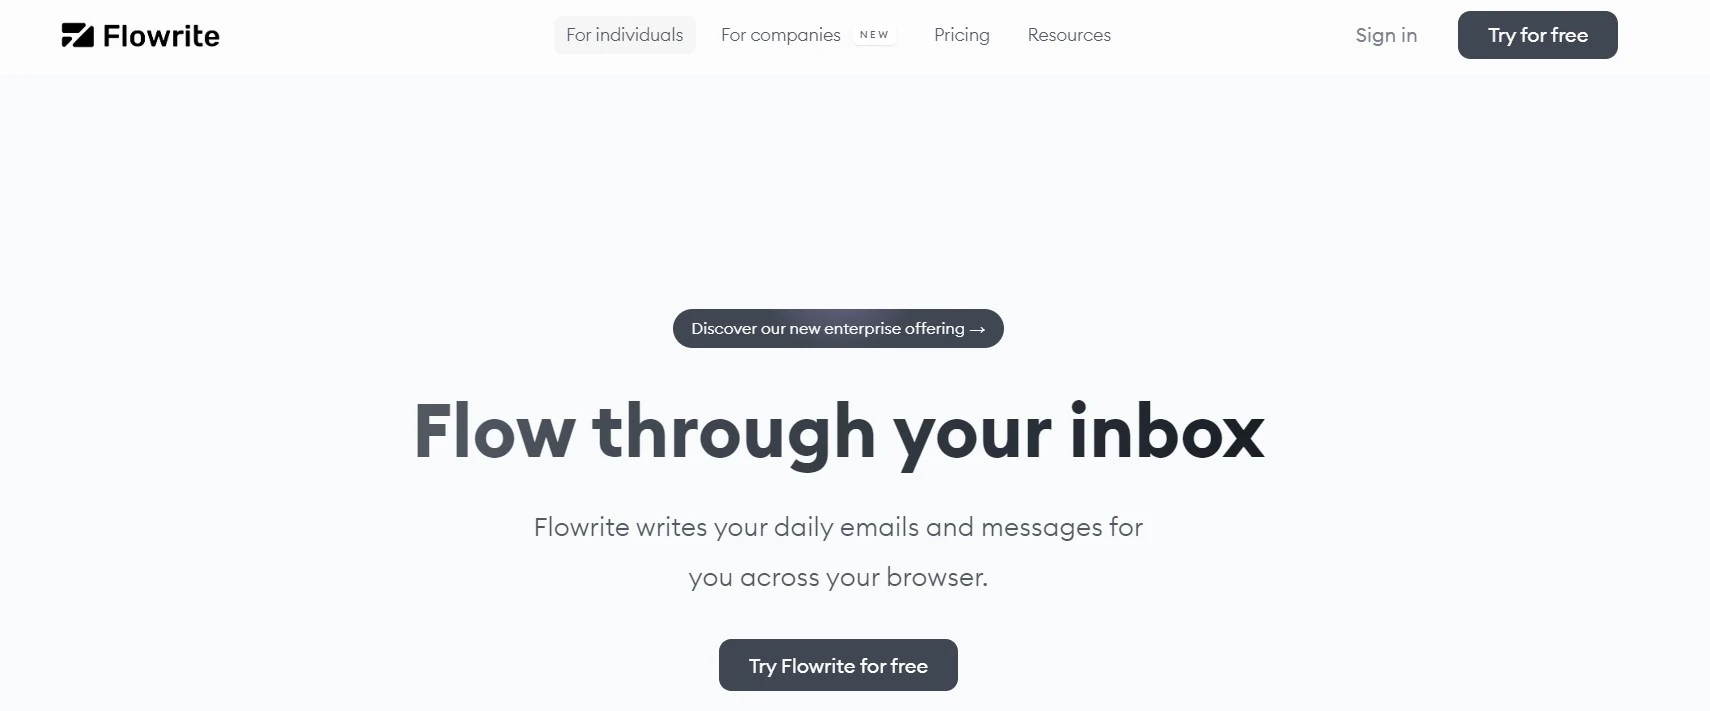 Flowrite Email Writing Software